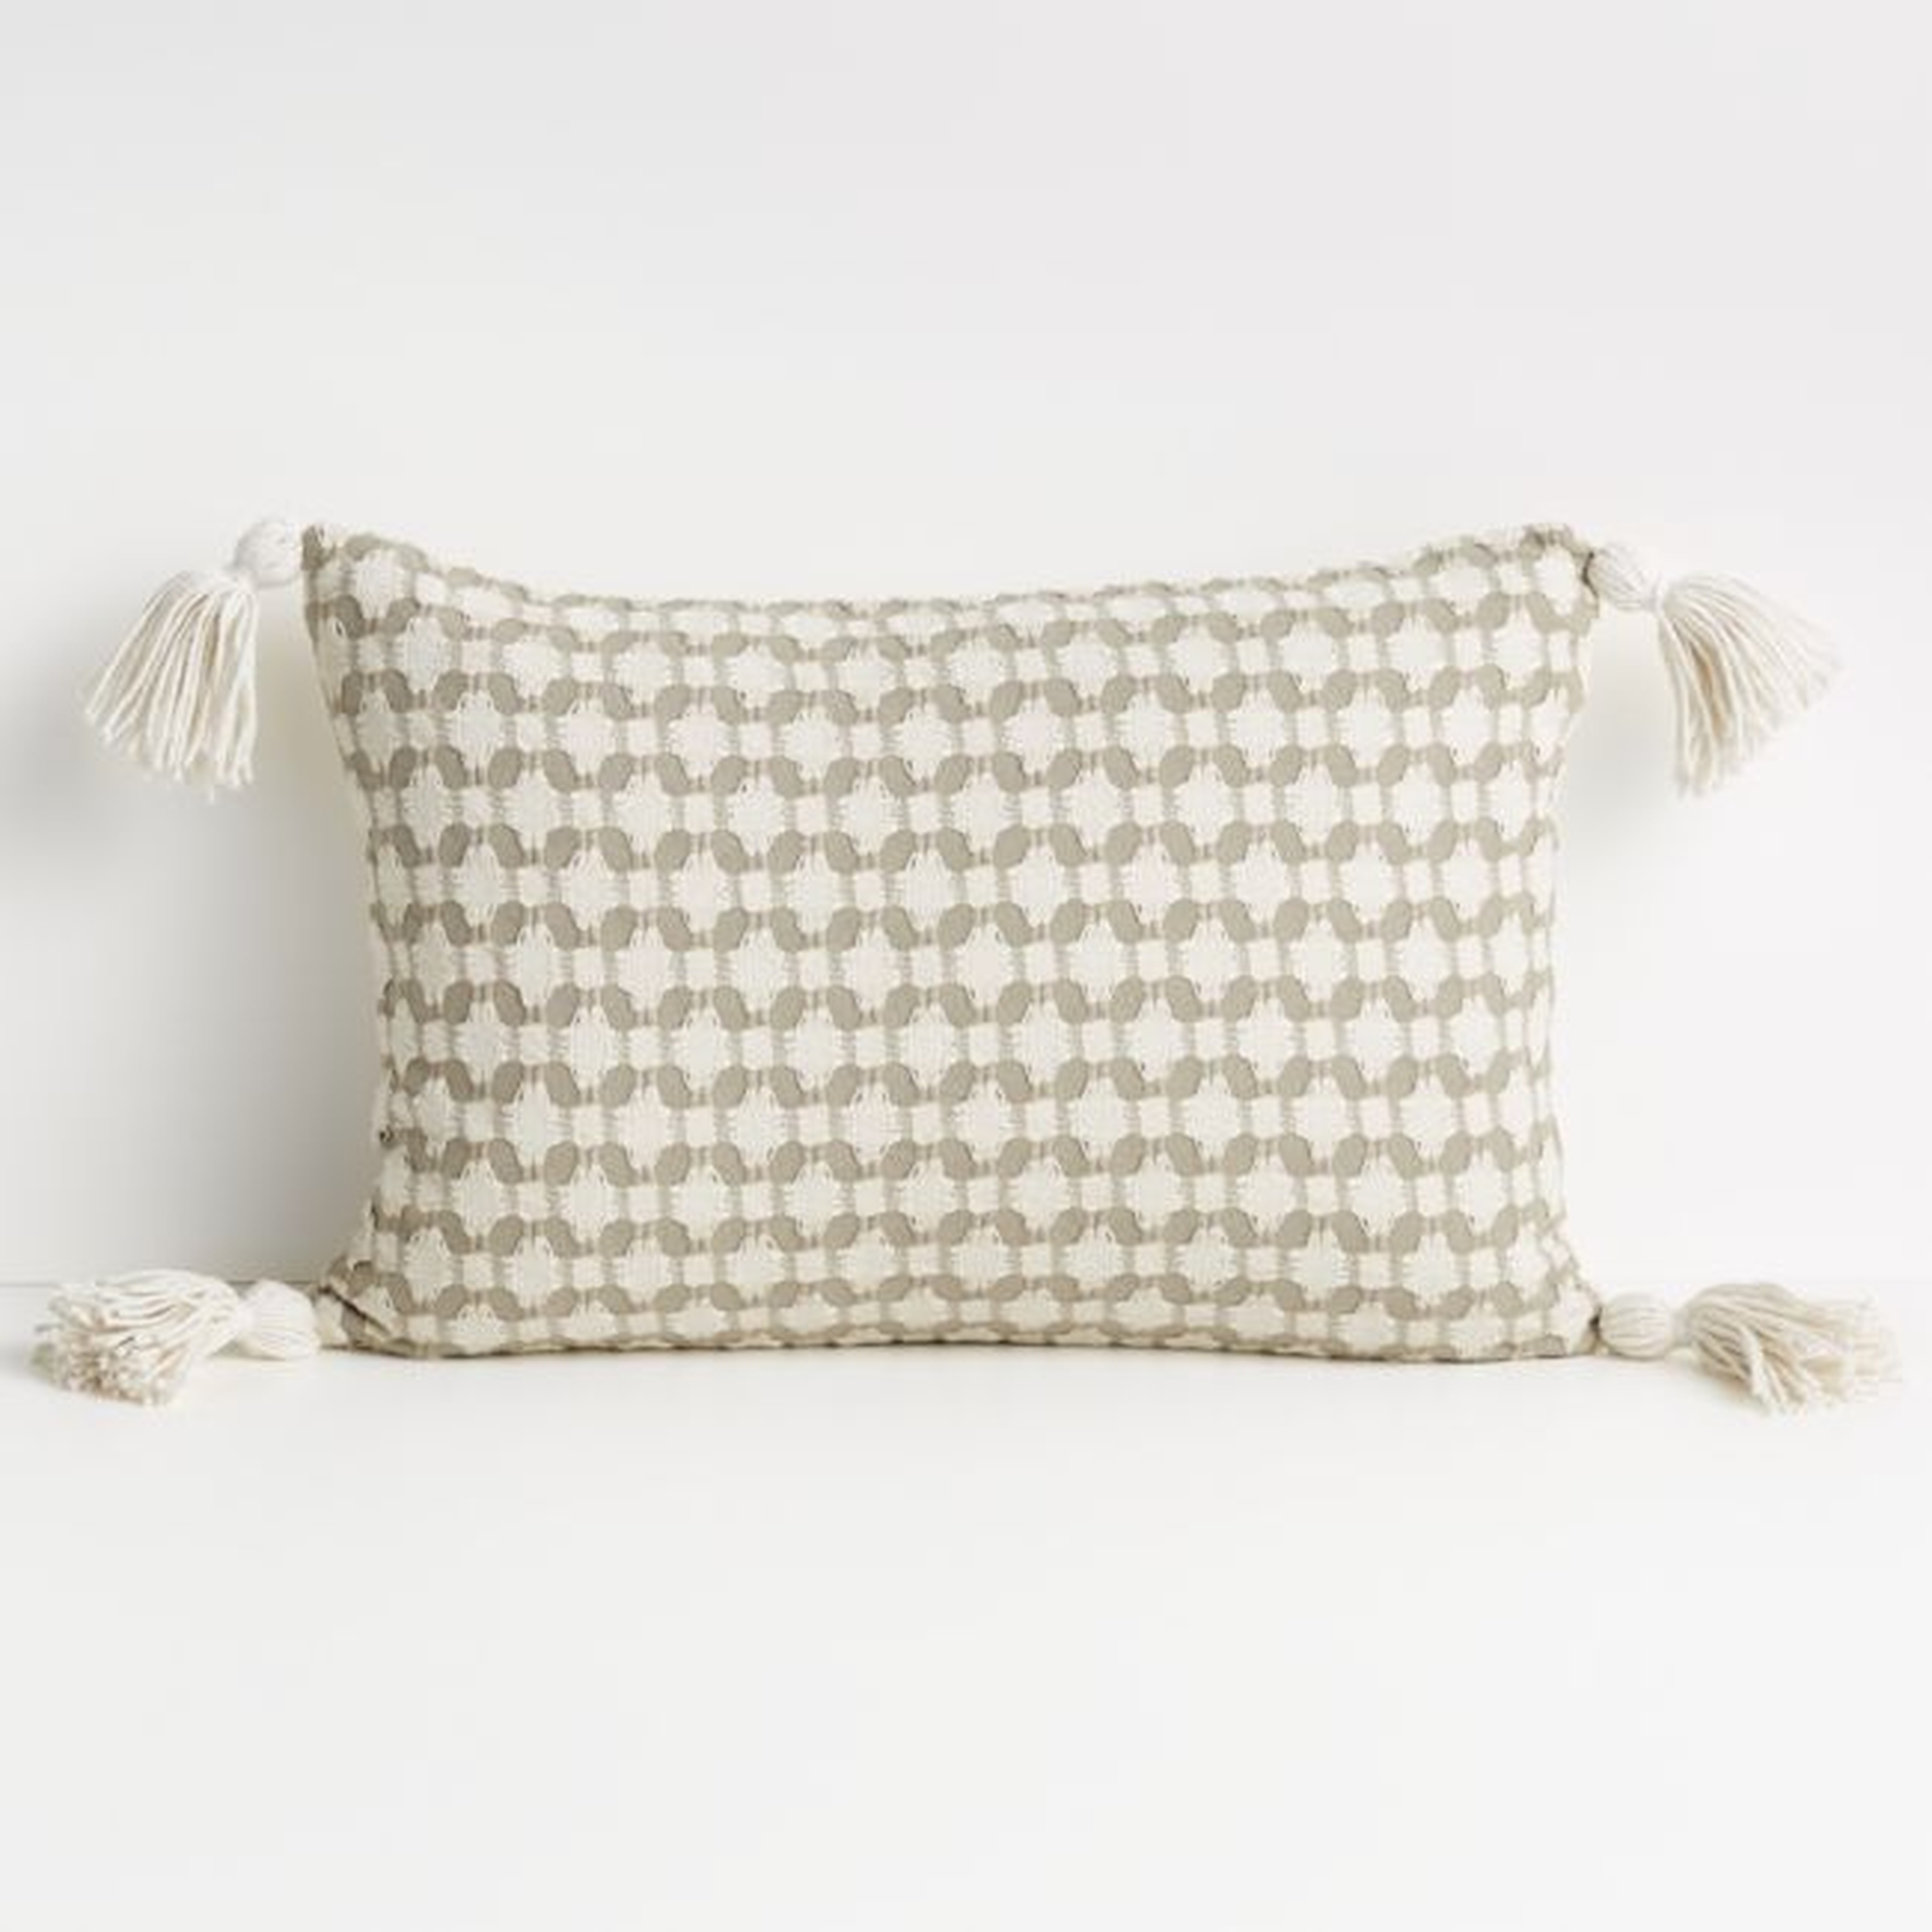 Tahona 18"x12" White Swan Textured Pillow with Down-Alternative Insert - Crate and Barrel